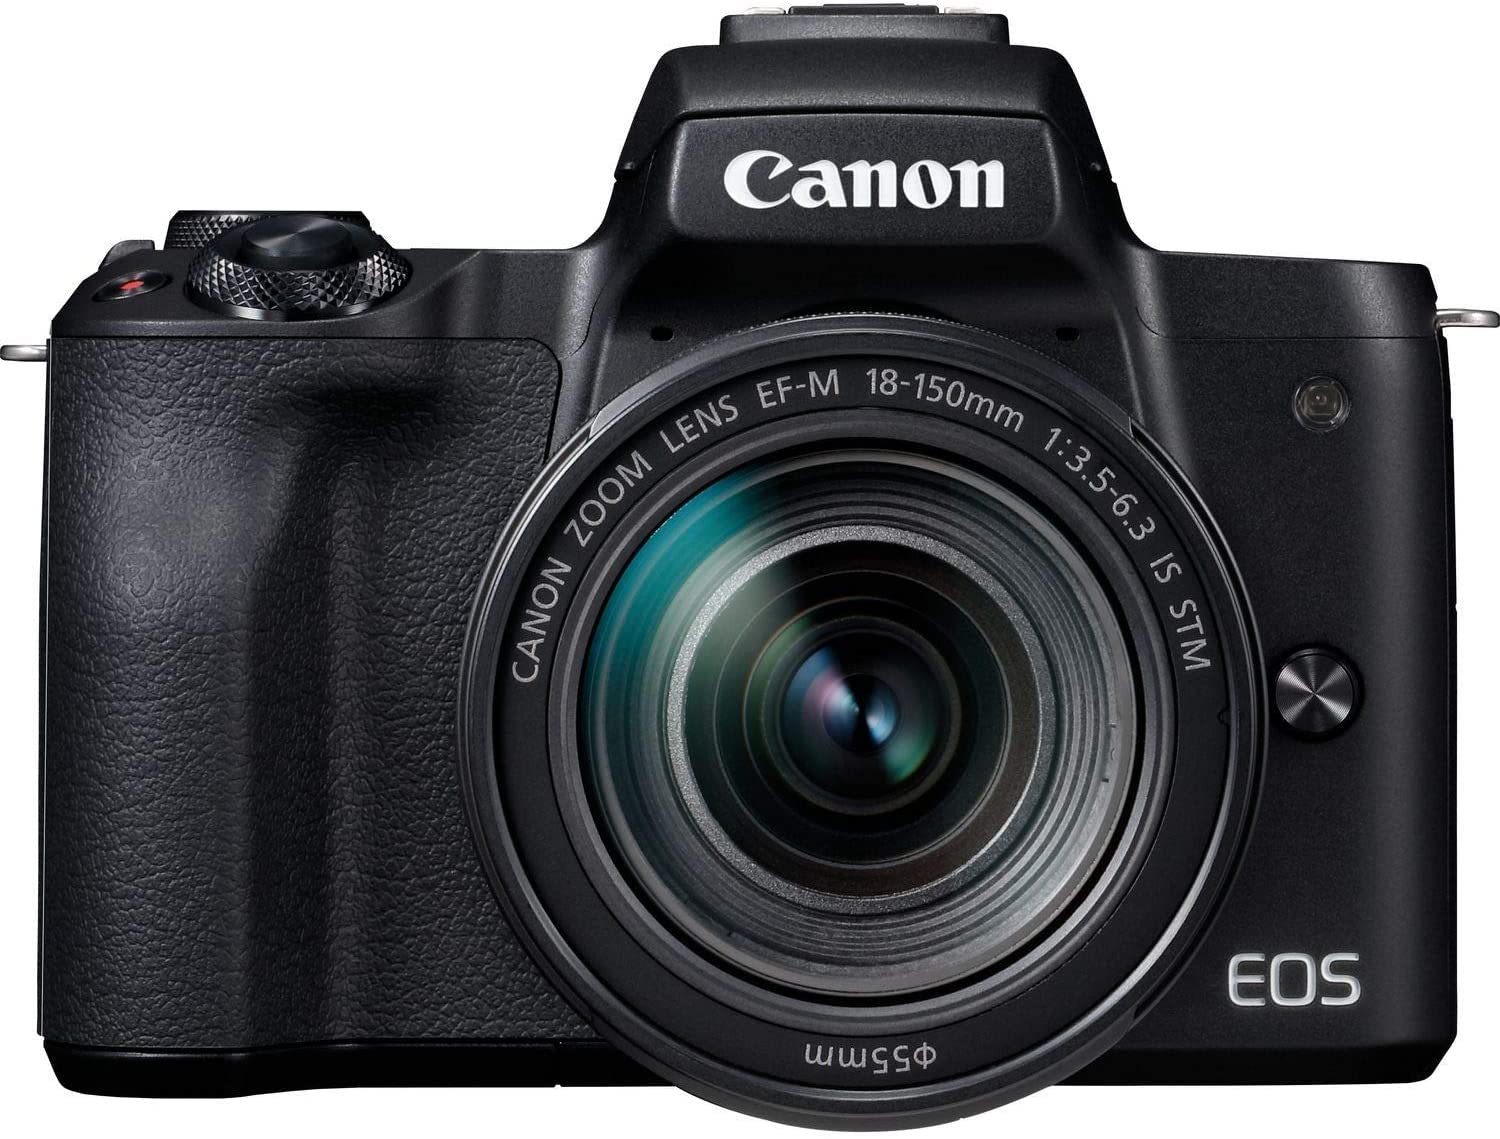 Canon EOS M50 Mark II Mirrorless Camera with EF-M 18-150mm is STM Lens (4728C001), 64GB Memory Card, Color Filter Kit, Filter Kit, 2 x LPE12 Battery, External Charger, Card Reader + More (Renewed)